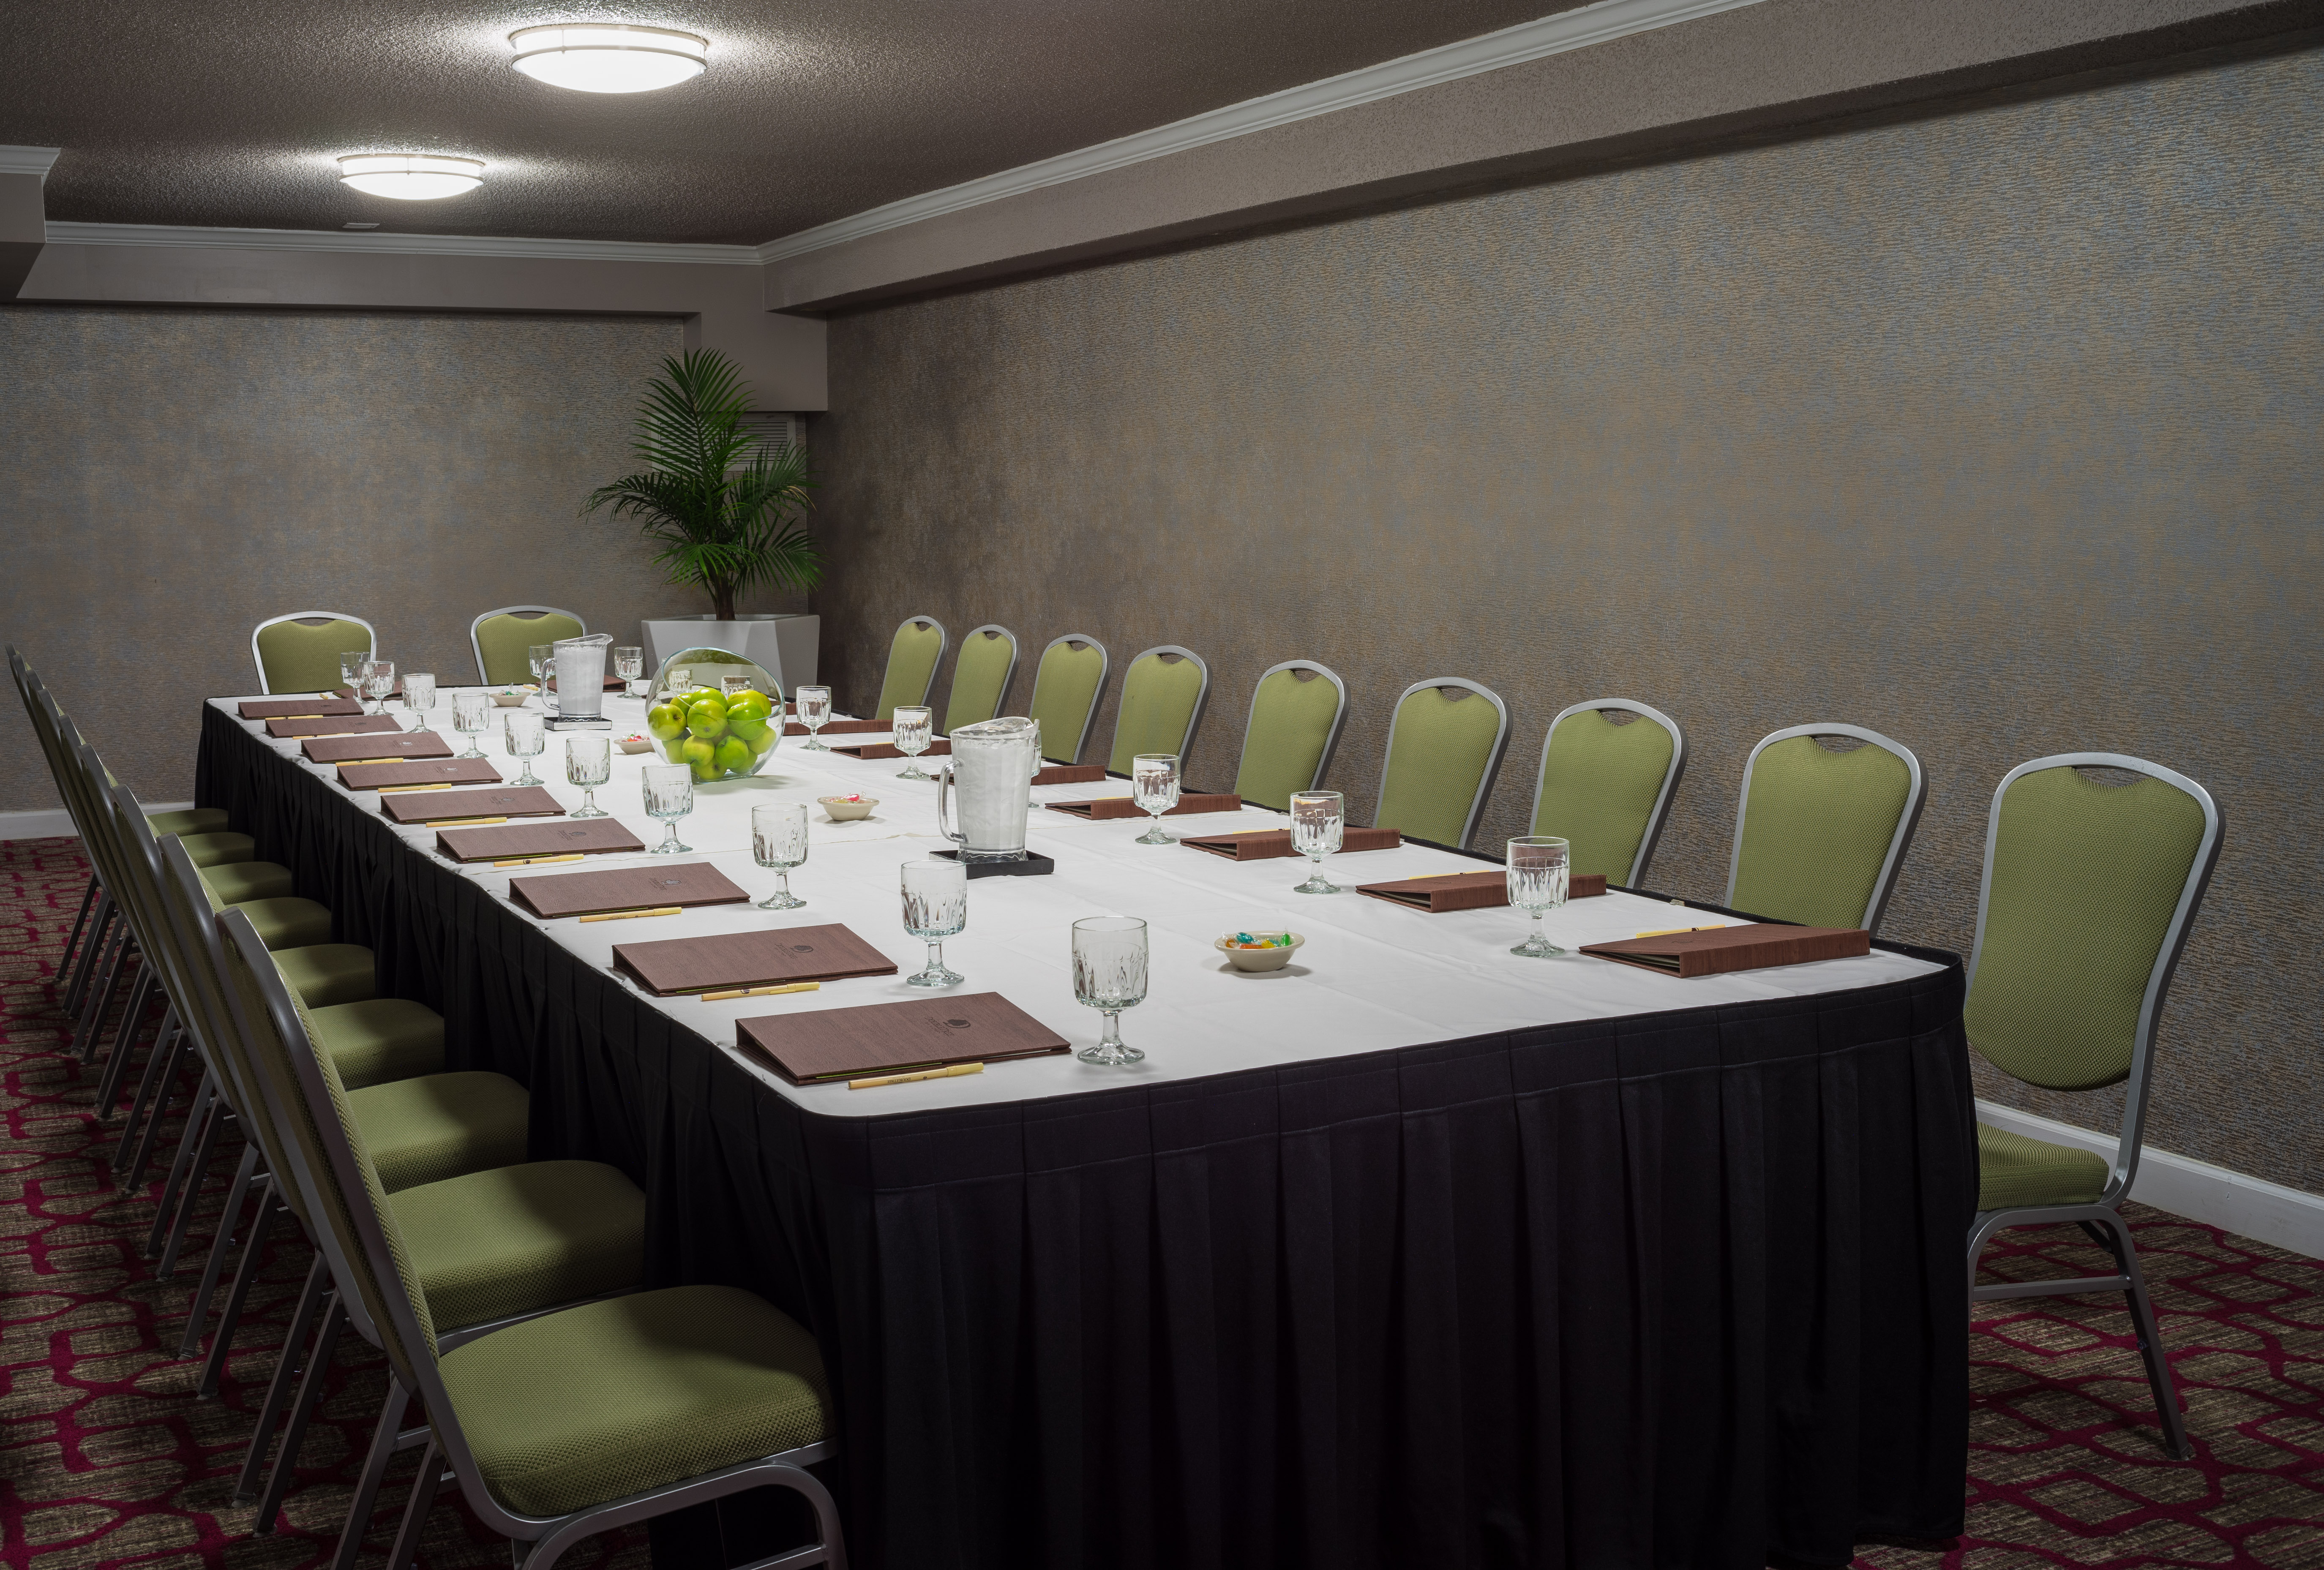 Forsyth Meeting Room In Boardroom Setup With Seating for 20 